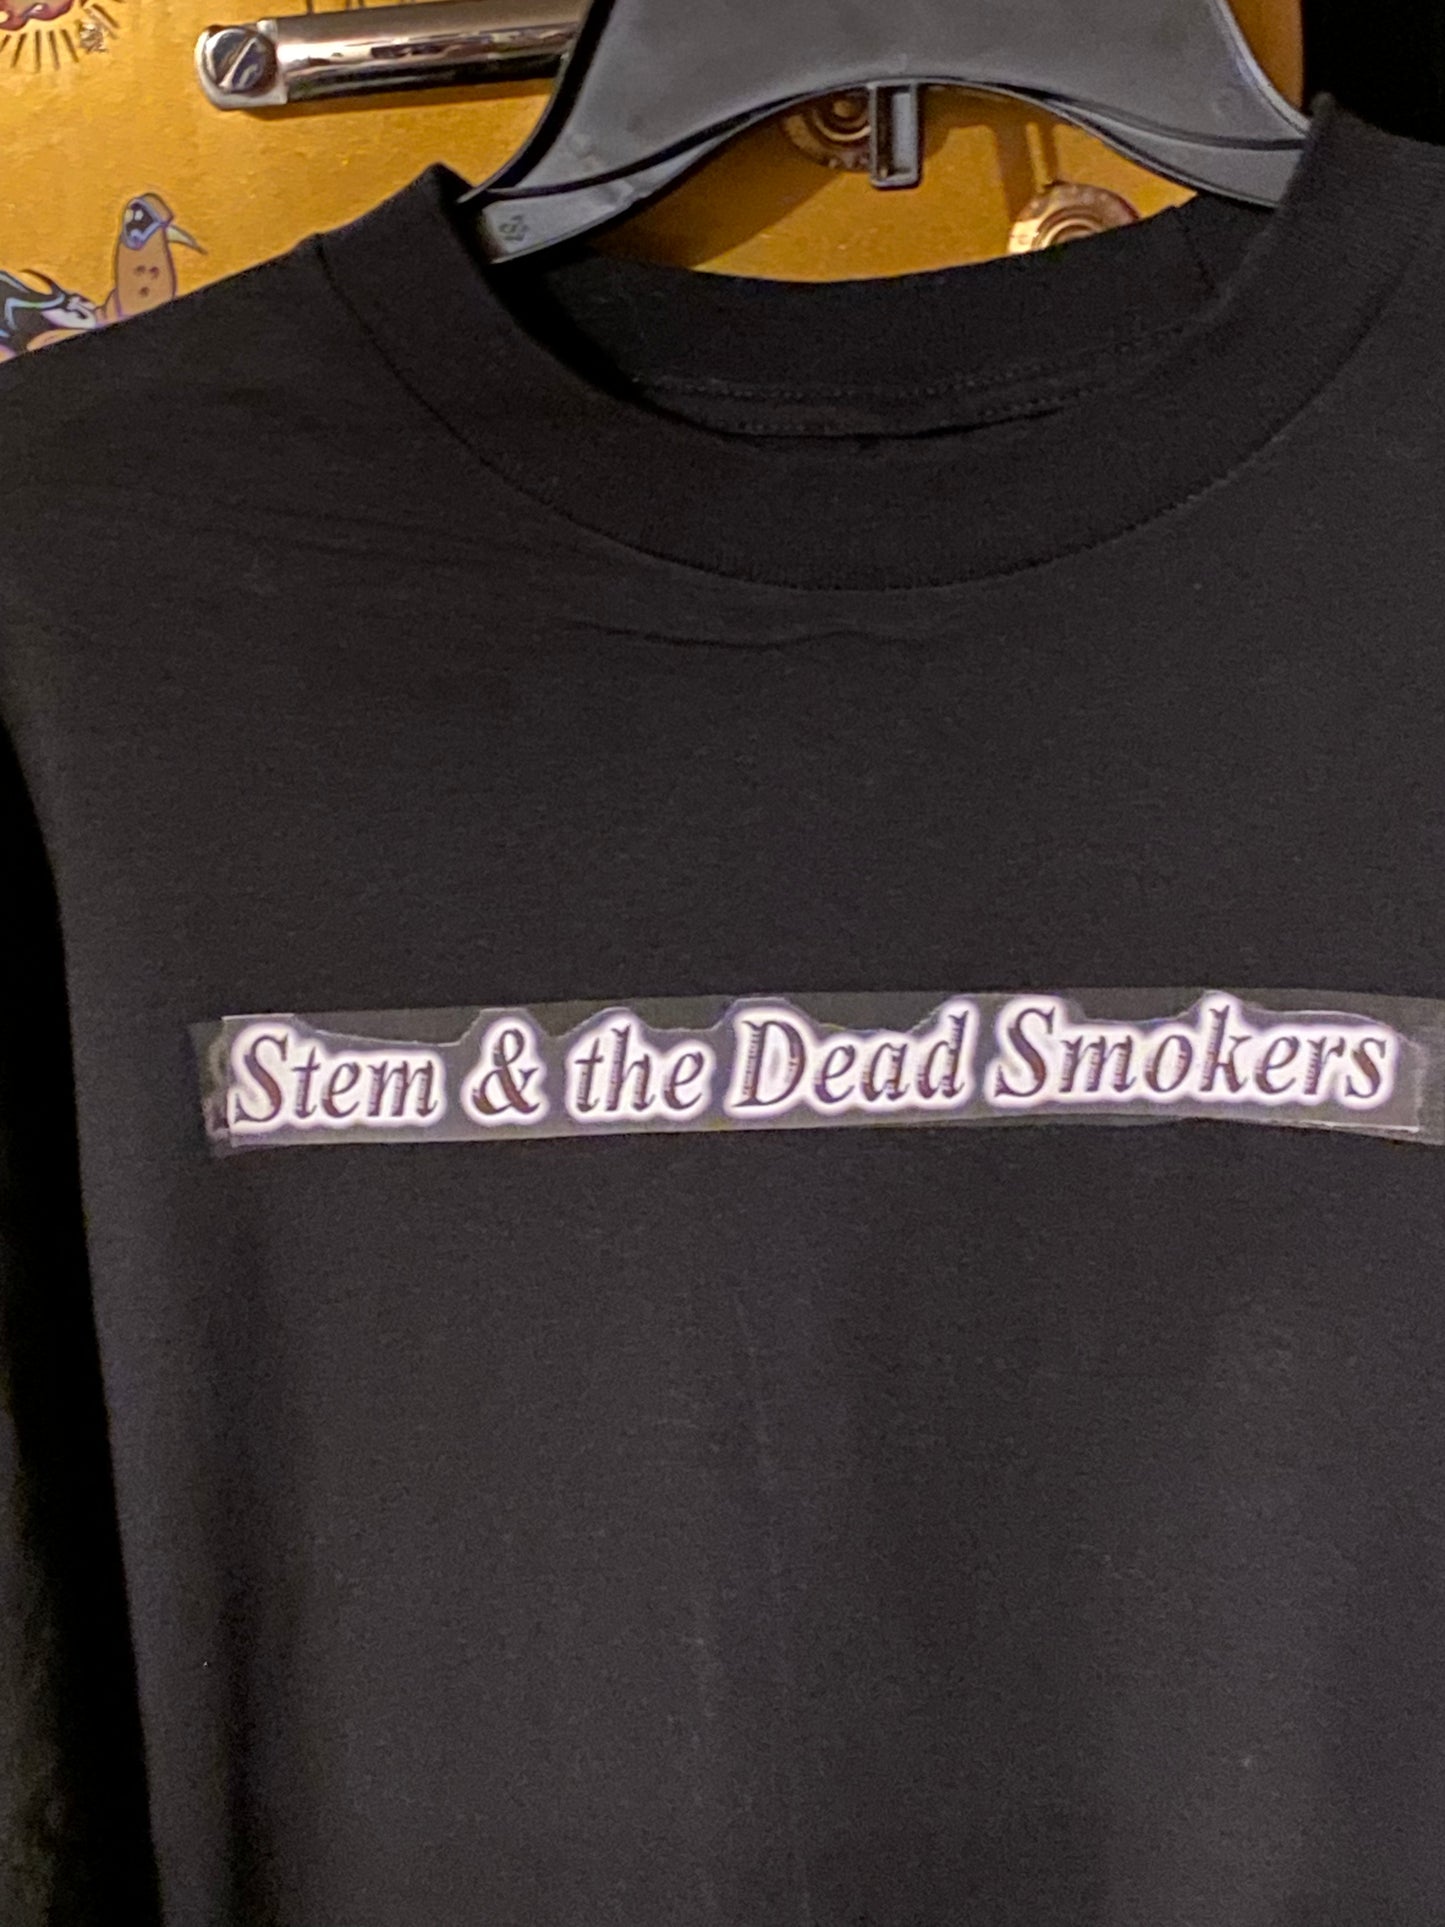 Stem & the Dead Smokers band script across the front